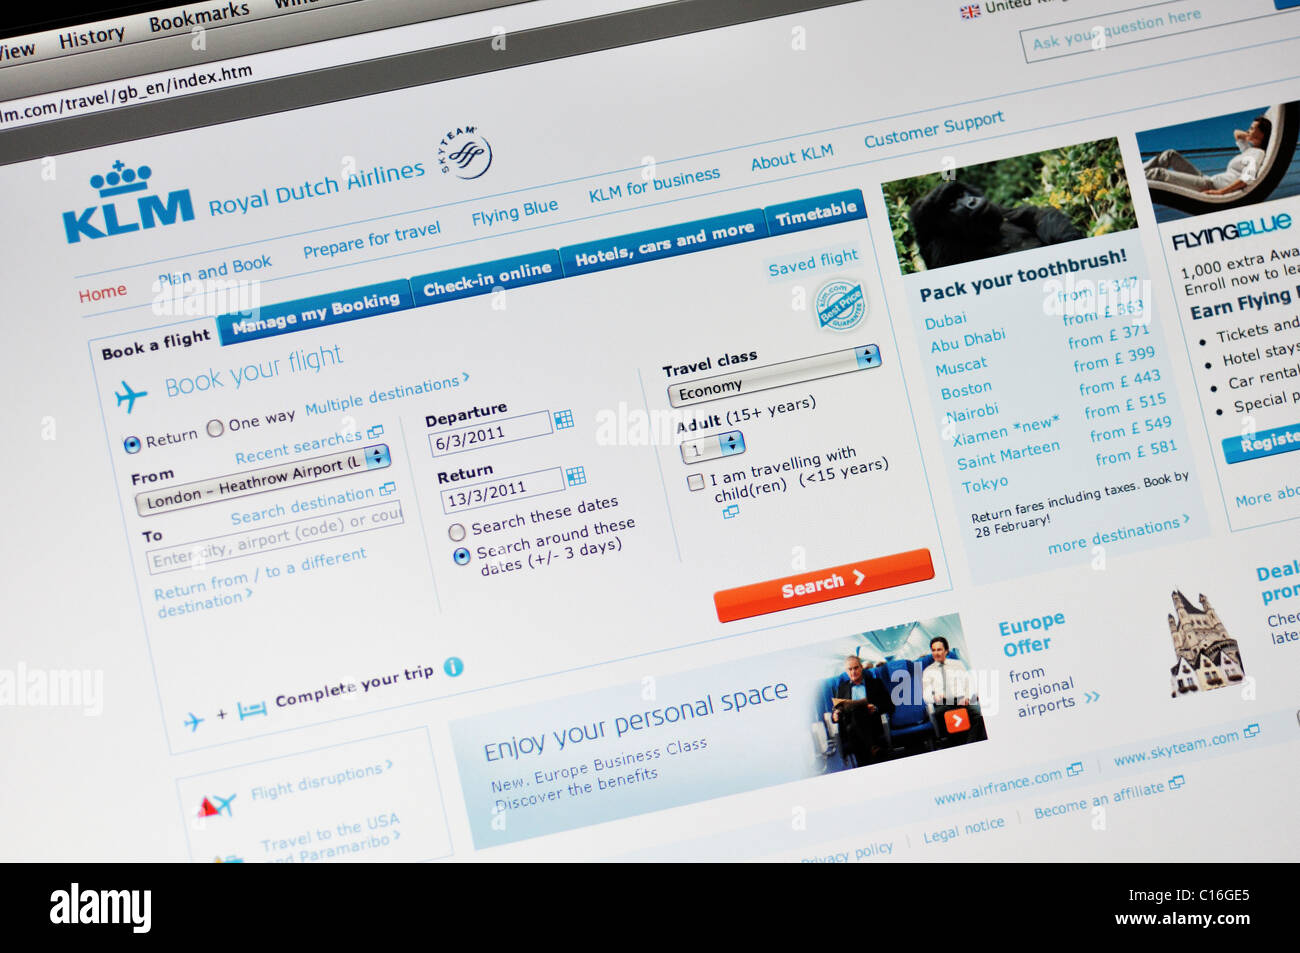 KLM Royal Dutch Airlines Webseite Stockfoto